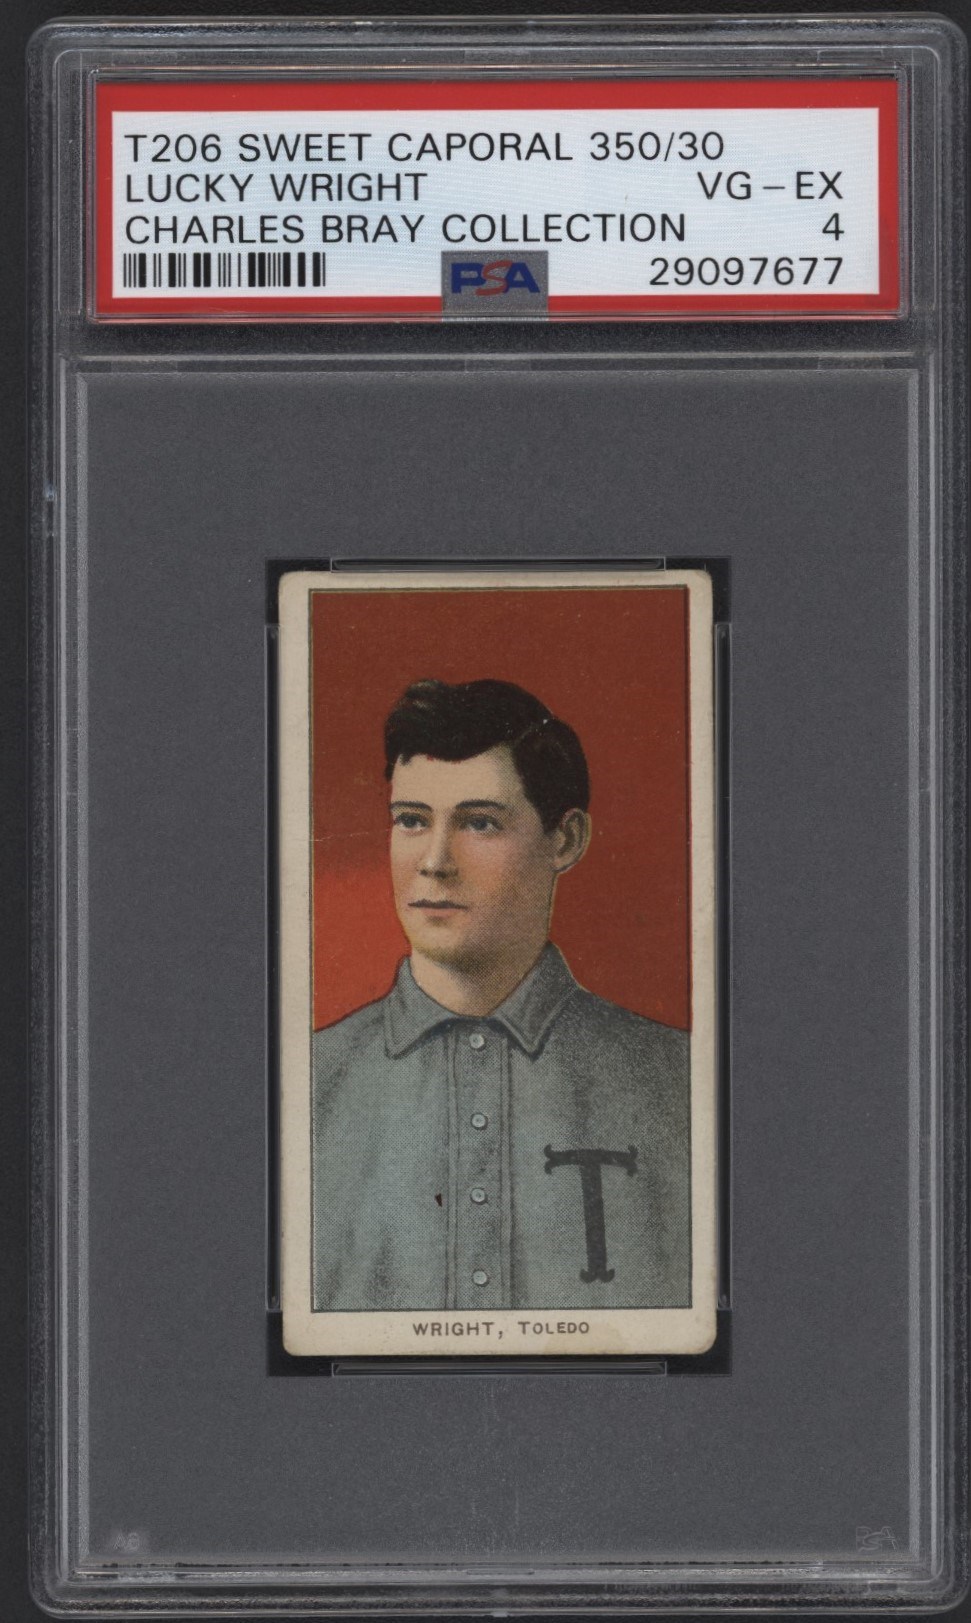 Baseball and Trading Cards - T206 Sweet Caporal 350/30 Lucky Wright PSA 4 From the Charles Bray Collection